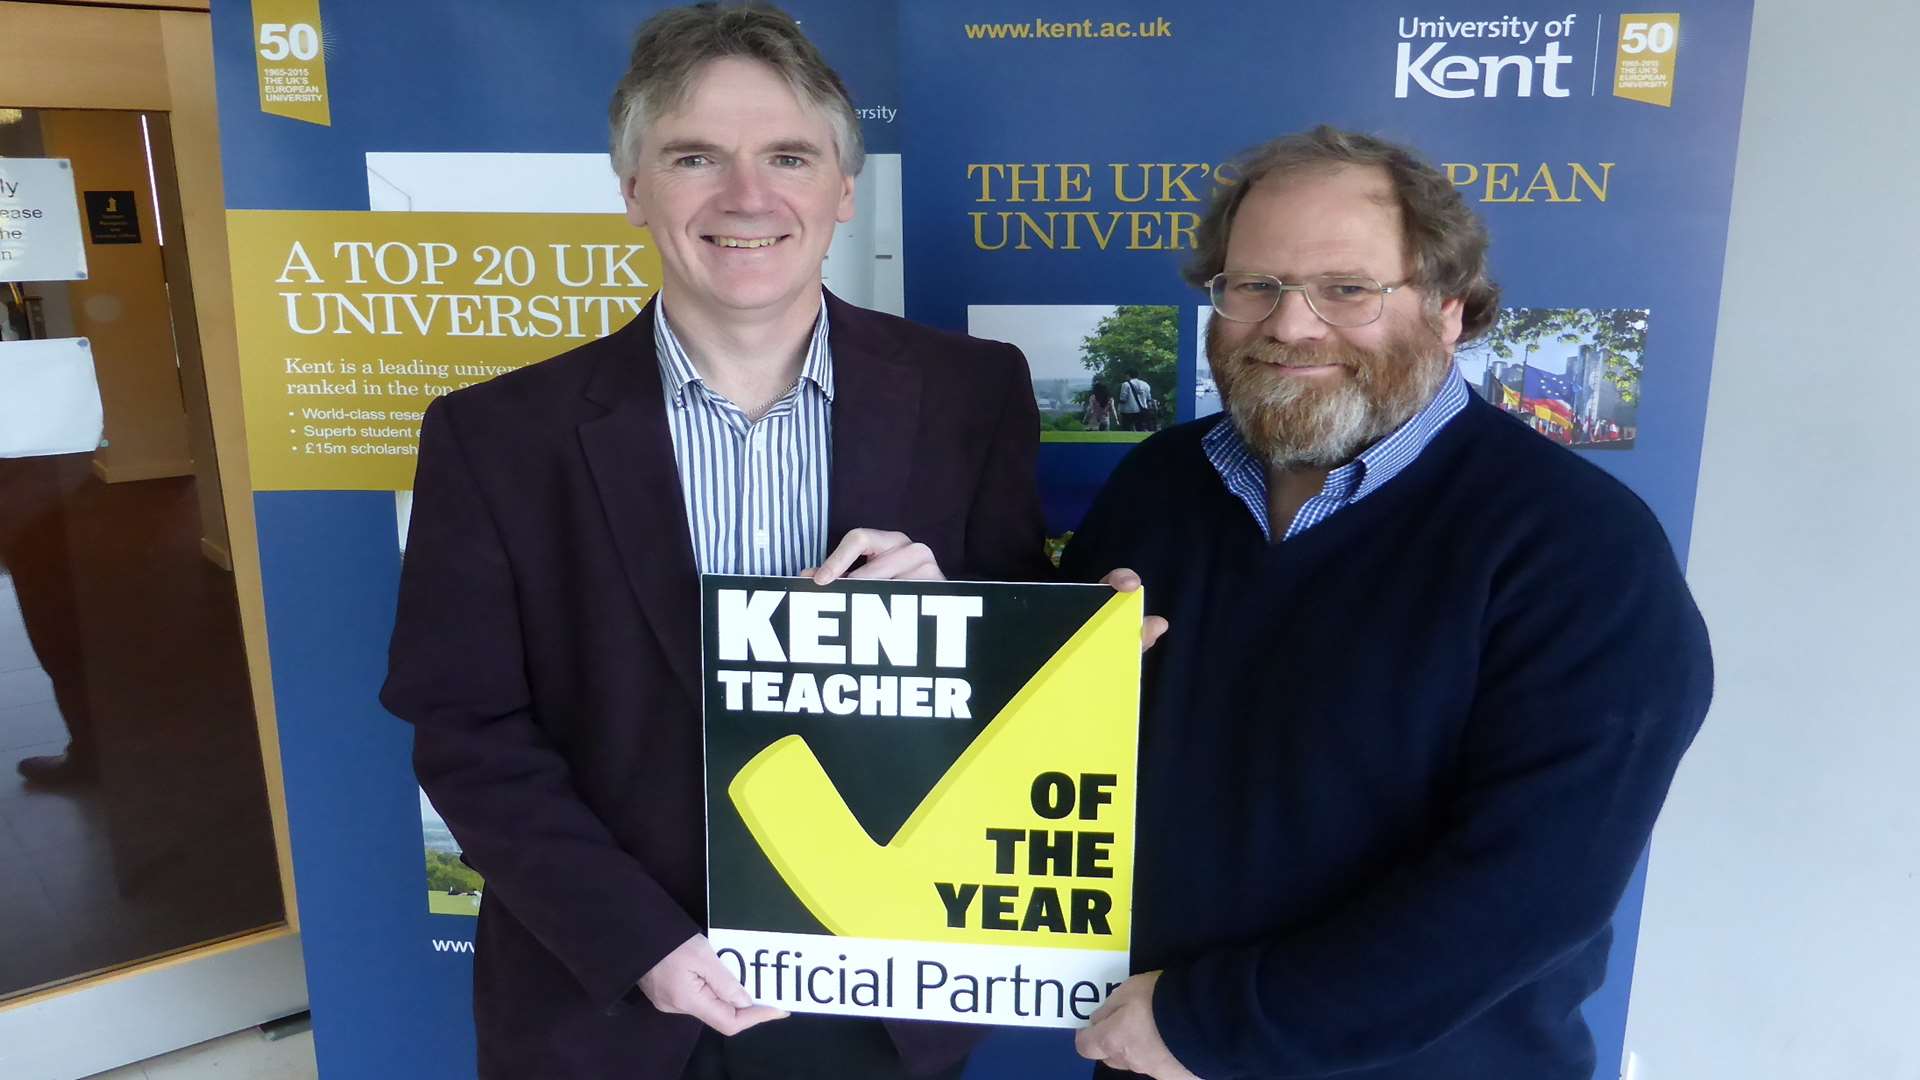 Prof Martin Warren, Head of Biosciences at the University of Kent and Prof Peter Clarkson, Interim Head of School of Mathematics, Statistics and Actuarial Science. Both departments have agreed to support the Kent Teacher of the Year Awards 2015.